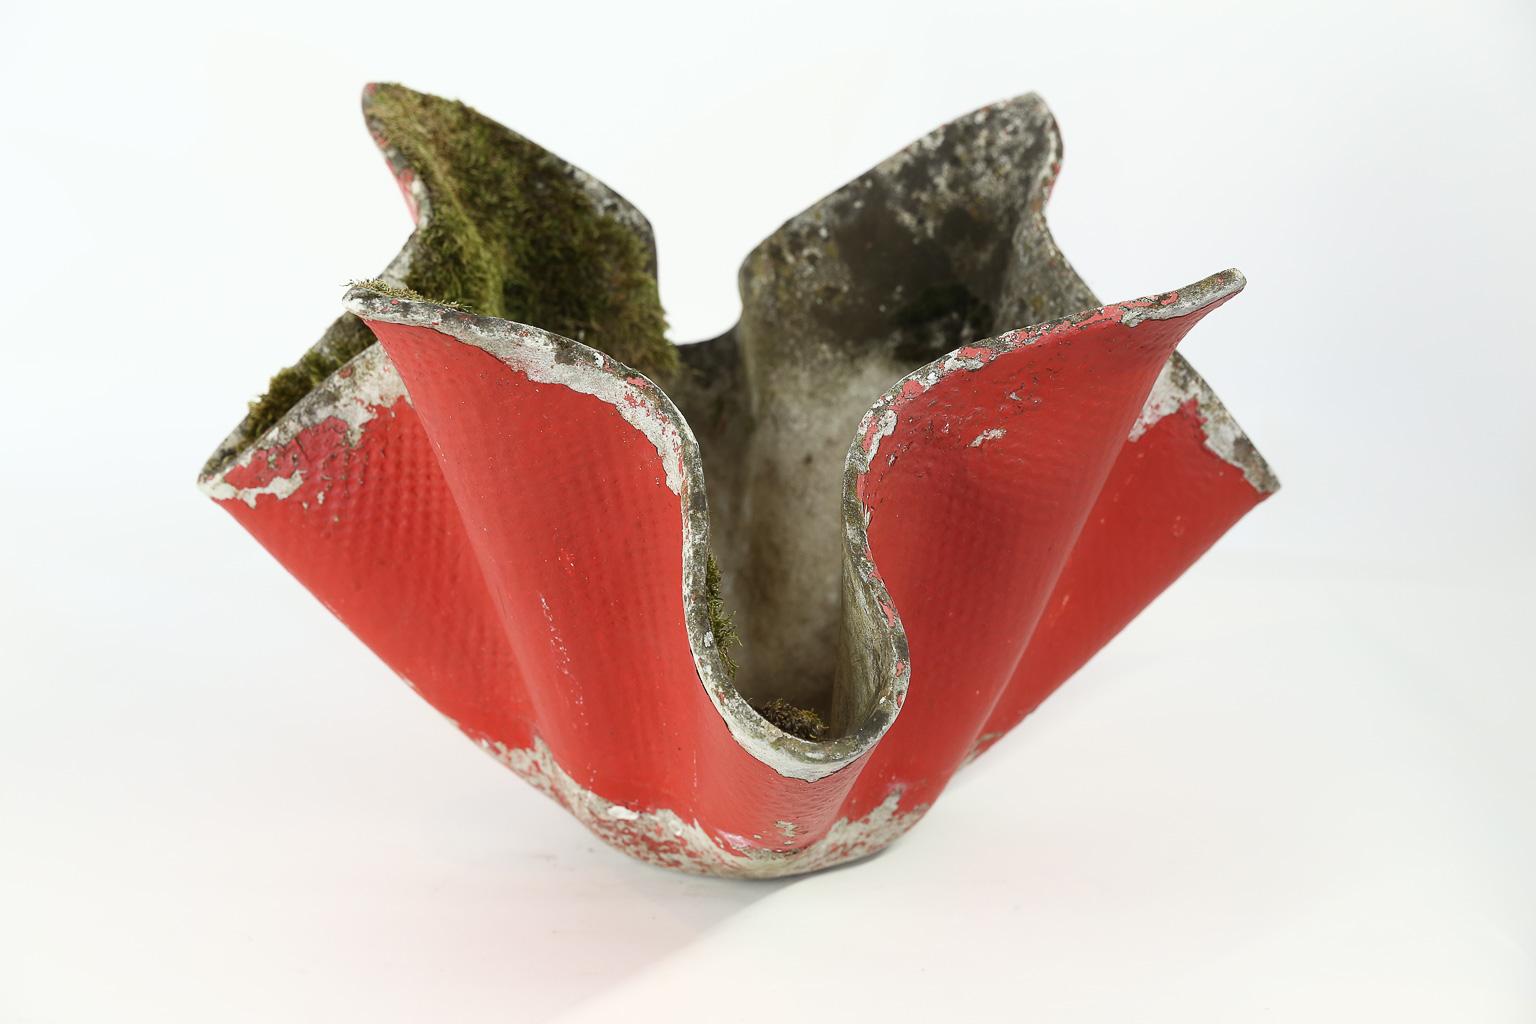 This is a concrete planter designed by Swiss architect Willy Guhl. The planter, in the shape of a lotus flower, has been painted red. This lovely piece for the home or garden could be used as a planter or sculpture.